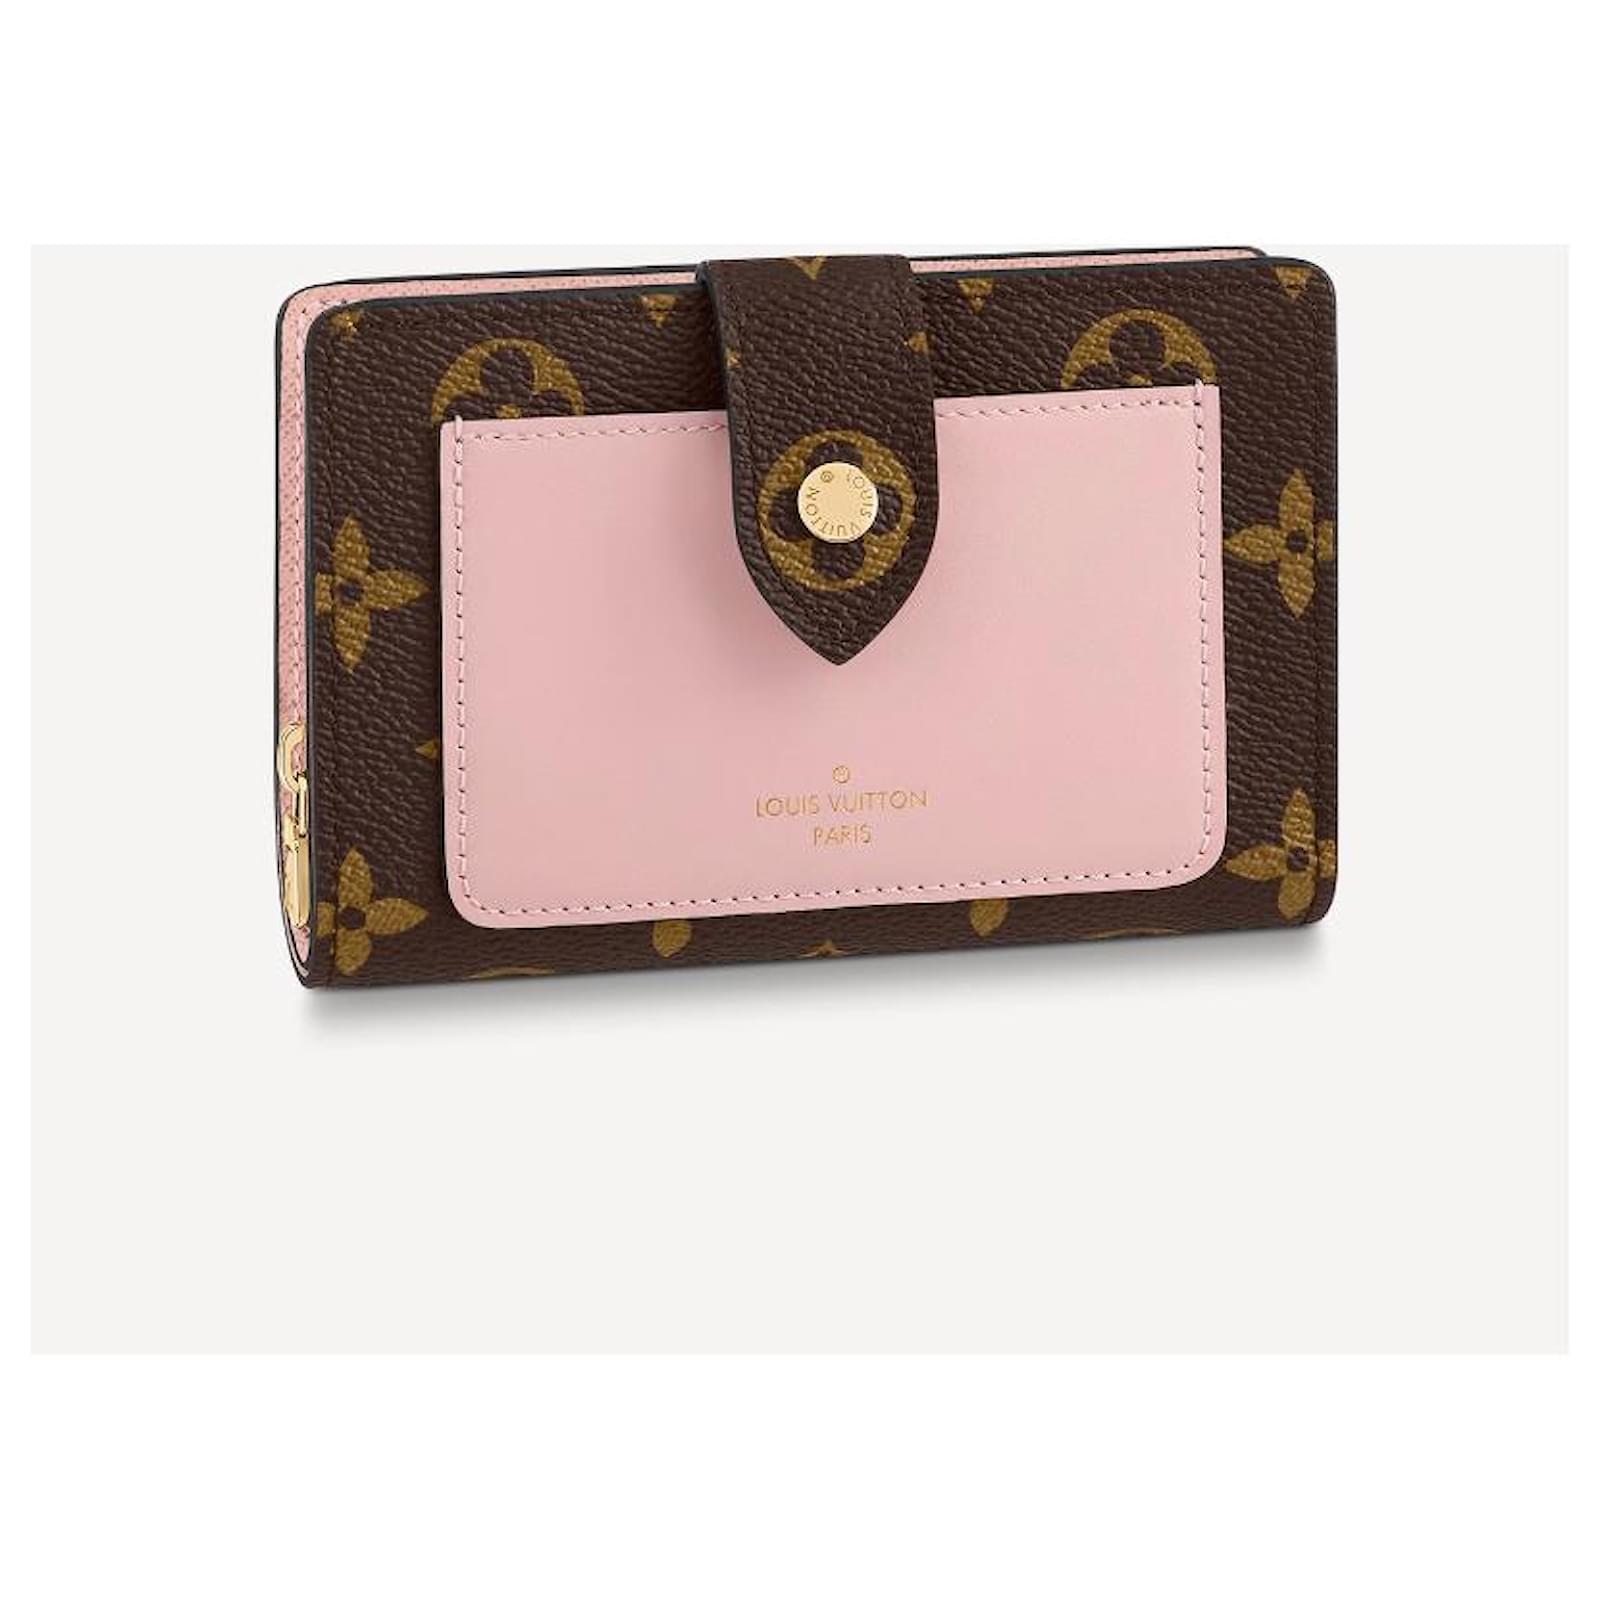 Louis Vuitton SLG Card Holder Pink Leather, New in Box - Julia